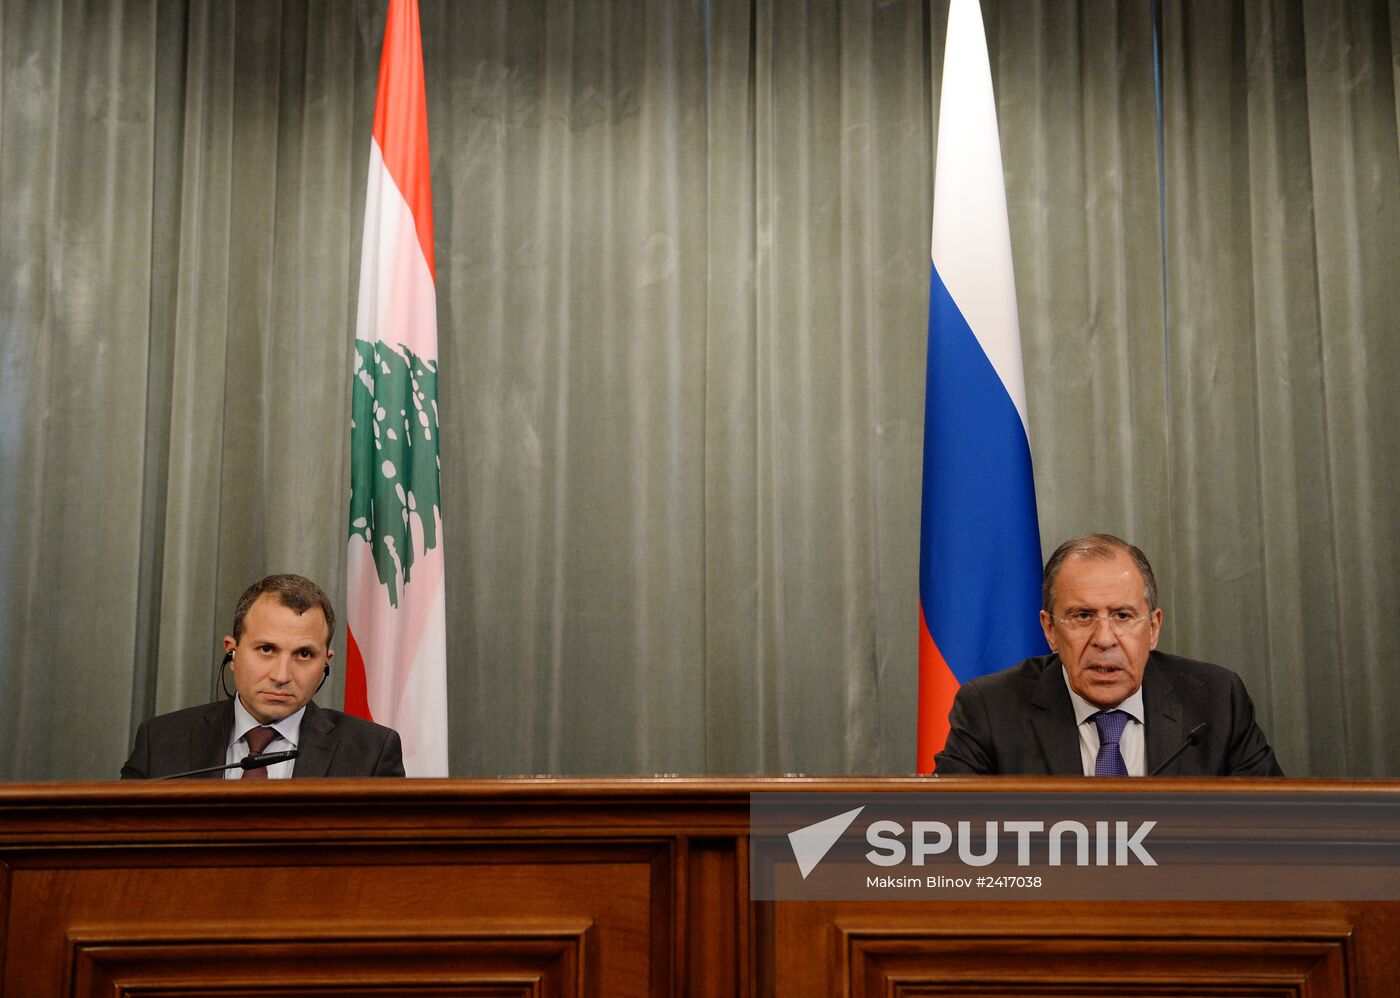 Foreign ministers of Russia and Lebanon meet in Moscow